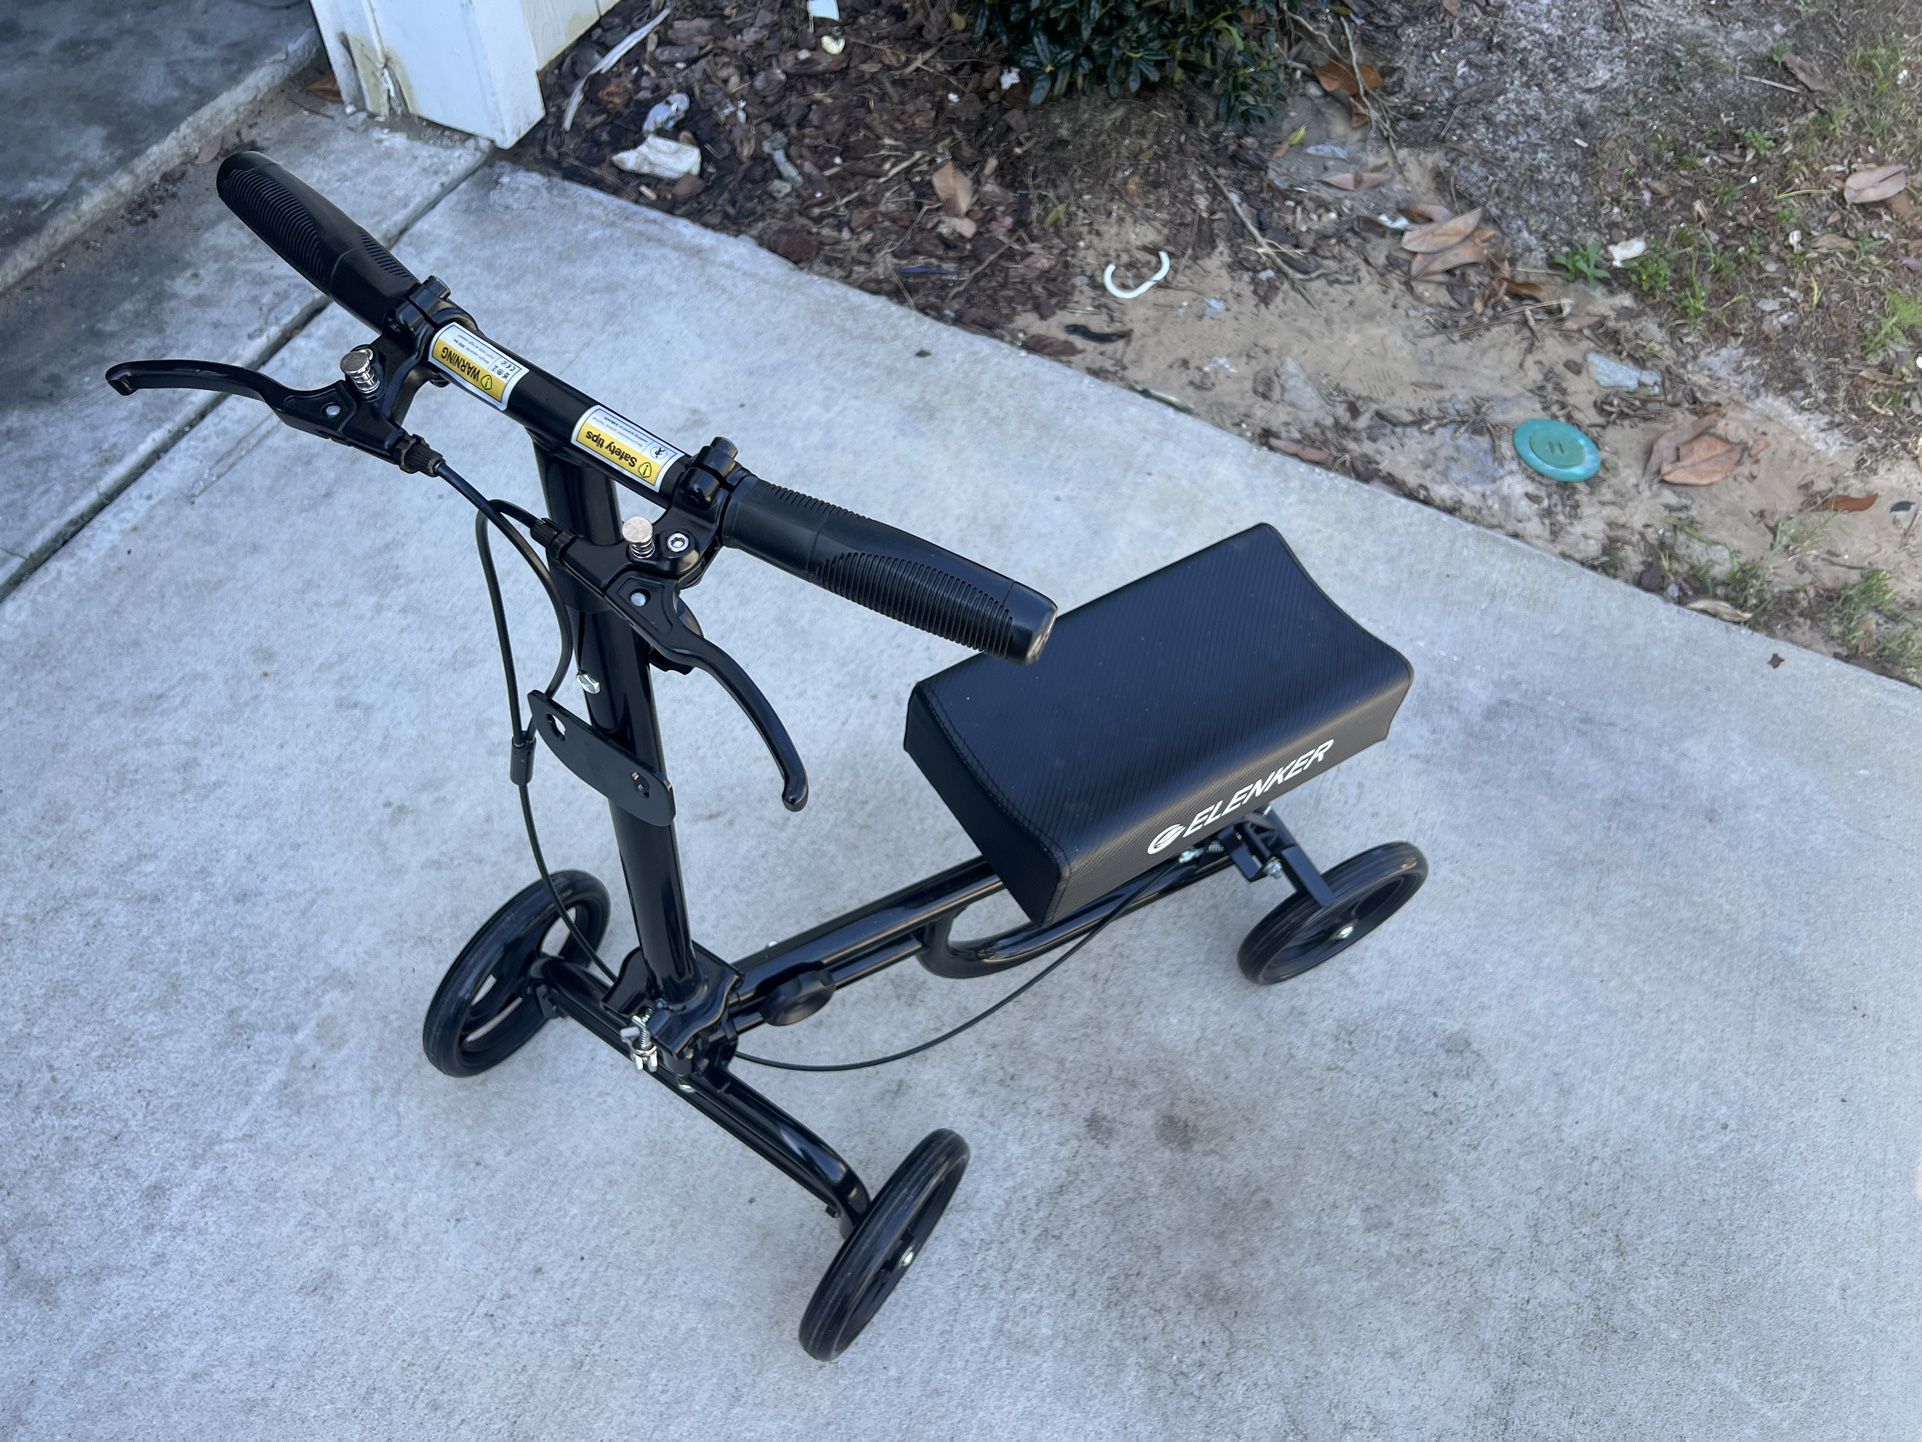 !!!!!!Steerable Knee Walker Available Now!!!! 